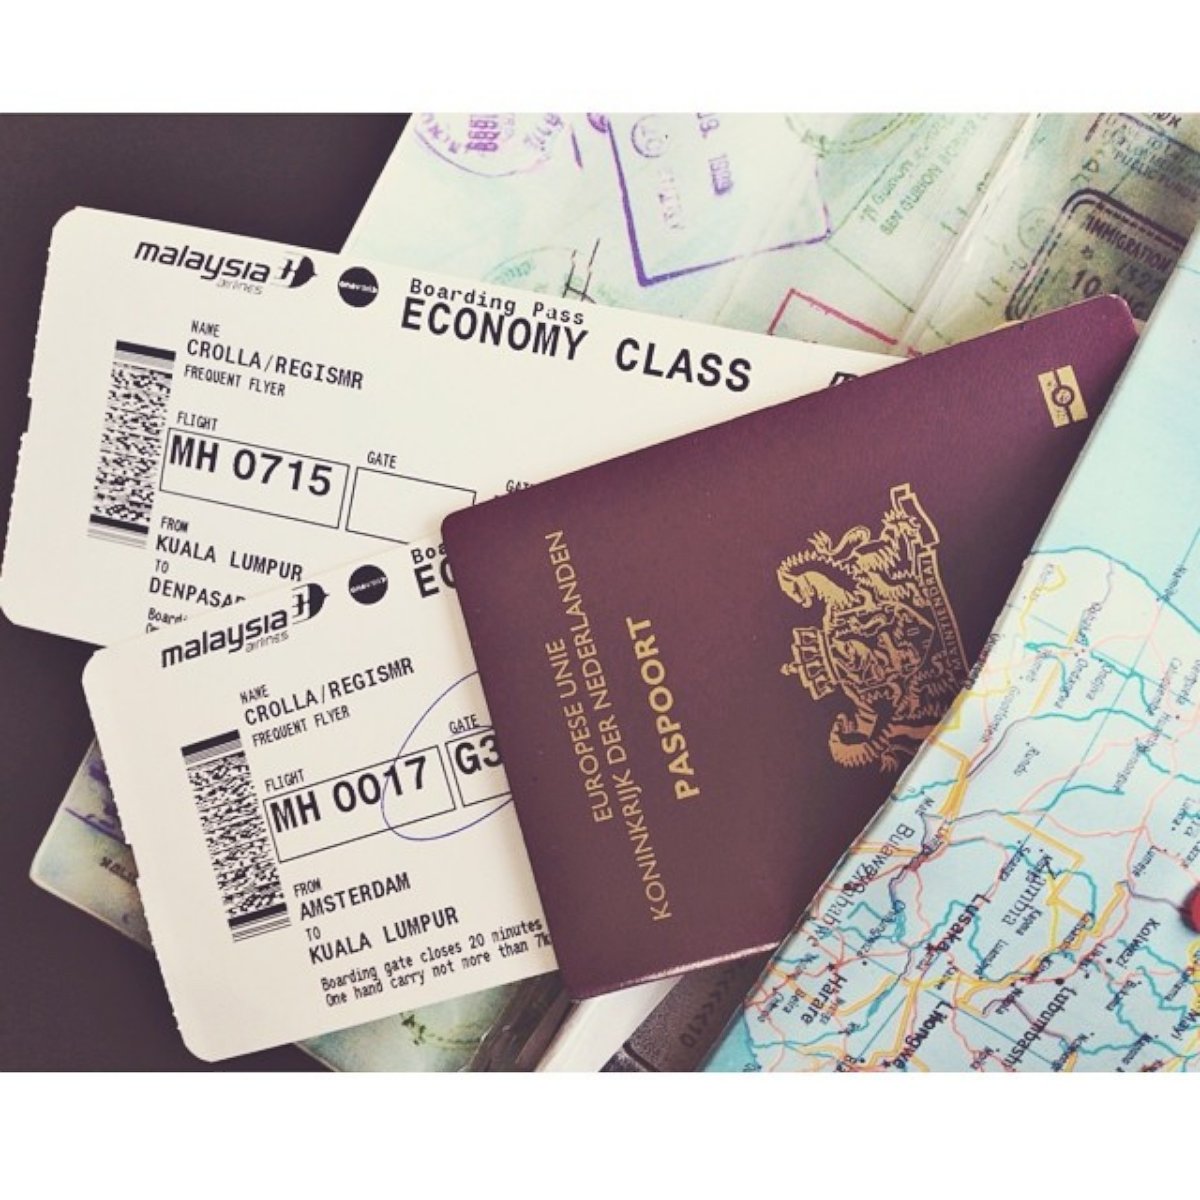 PHOTO: Regis Crolla, a passenger on Malaysia Airlines flight MH17 which crashed in East Ukraine, posted this photo to Instagram on July 17, 2014 with the caption, "AMS --> Kuala Lumpur --> Bali. Hier zo veel zin in !! Adios amigoz."